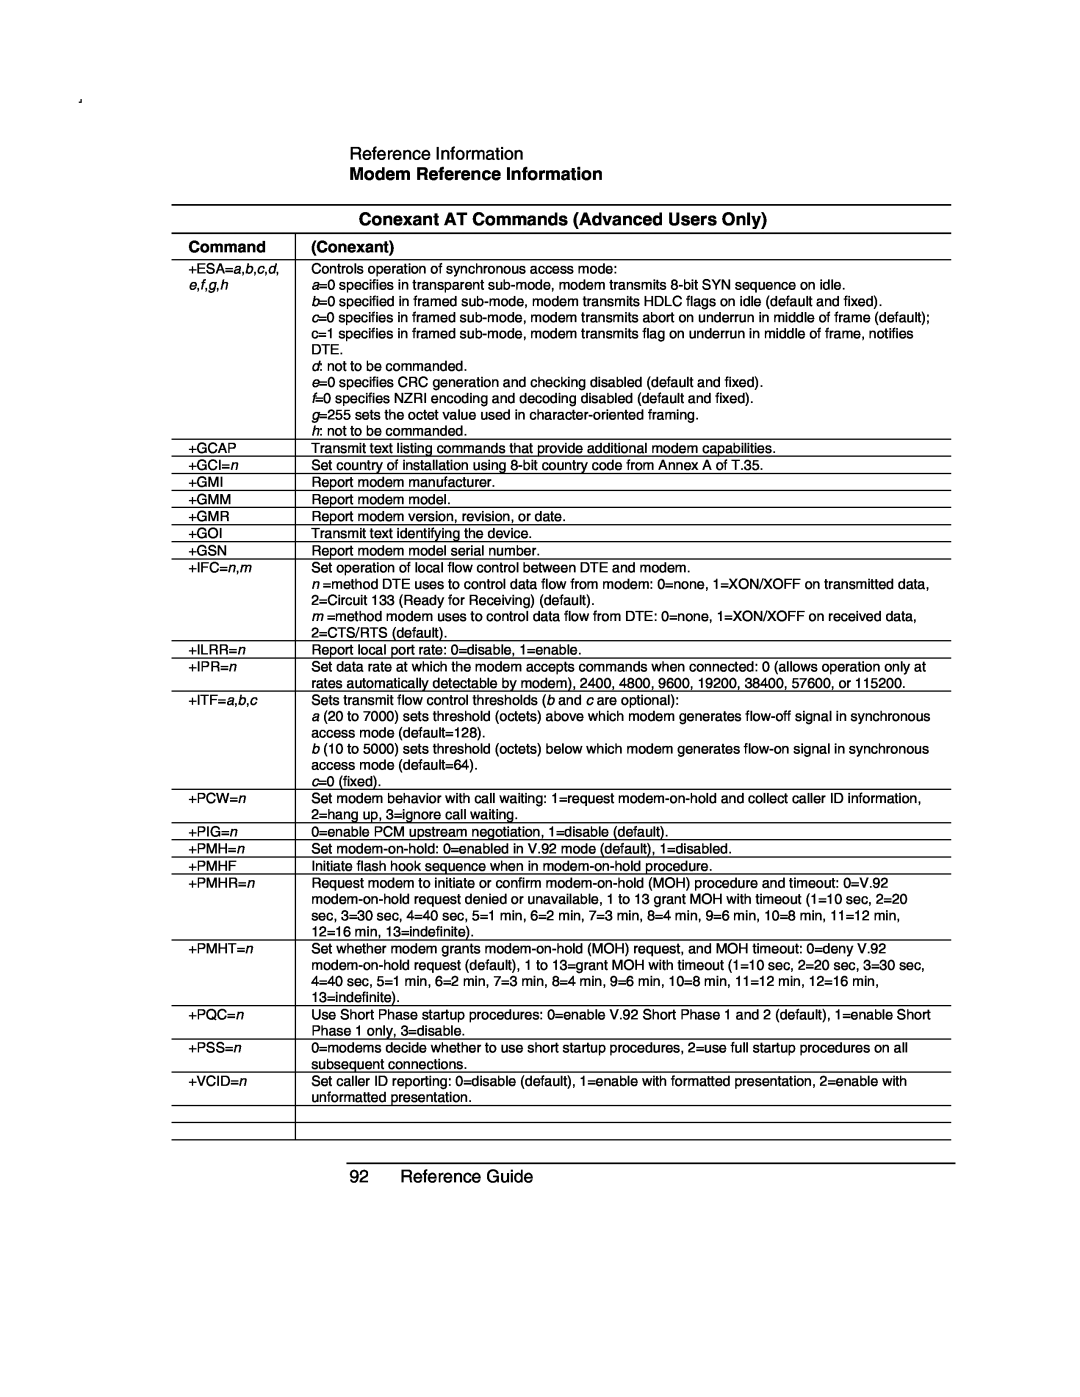 Compaq AMC20493-KT5 Reference Guide, Modem Reference Information, Conexant AT Commands Advanced Users Only, e,f,g,h 